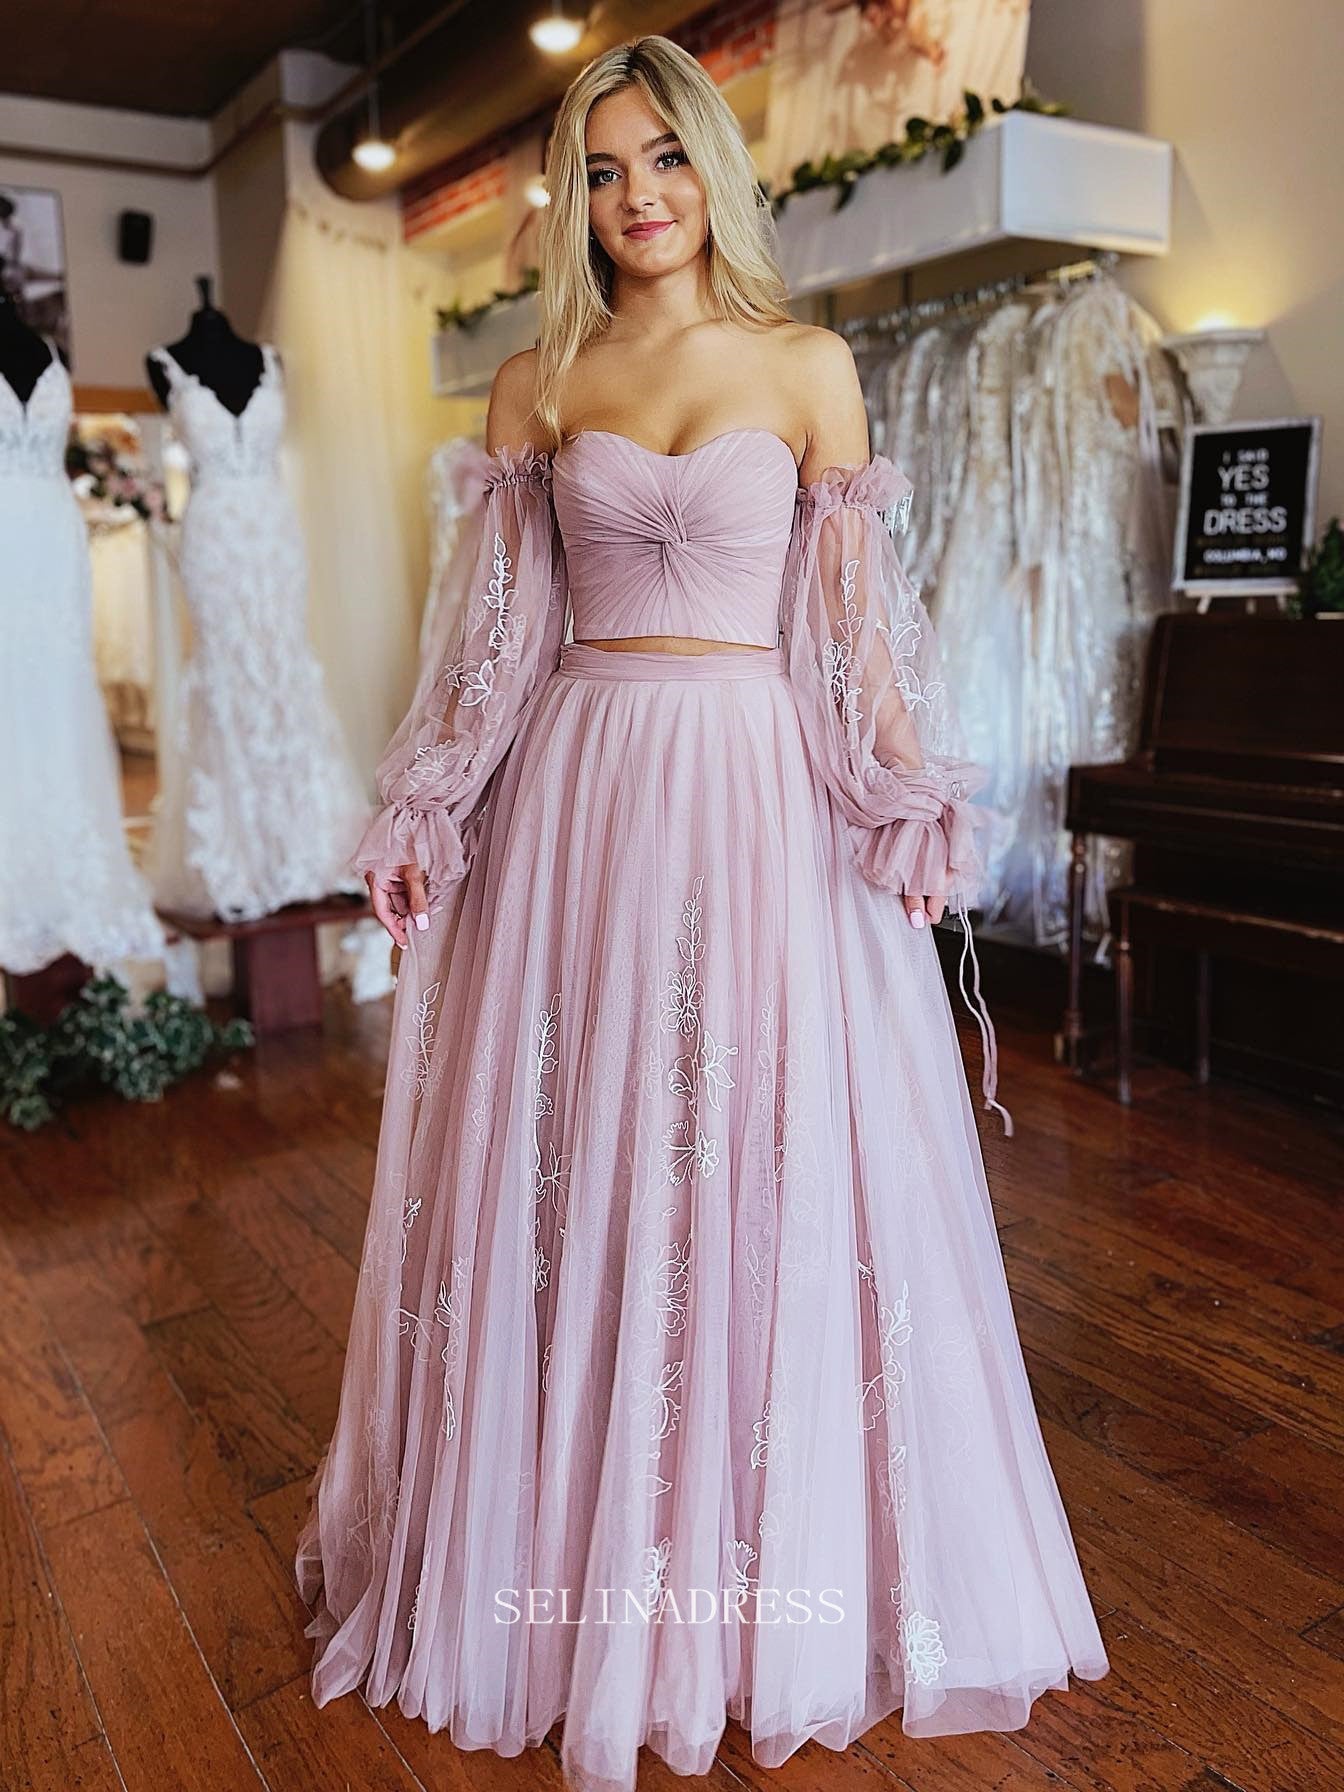 Long-Sleeve Two-Piece Short Pleated Homecoming Dress